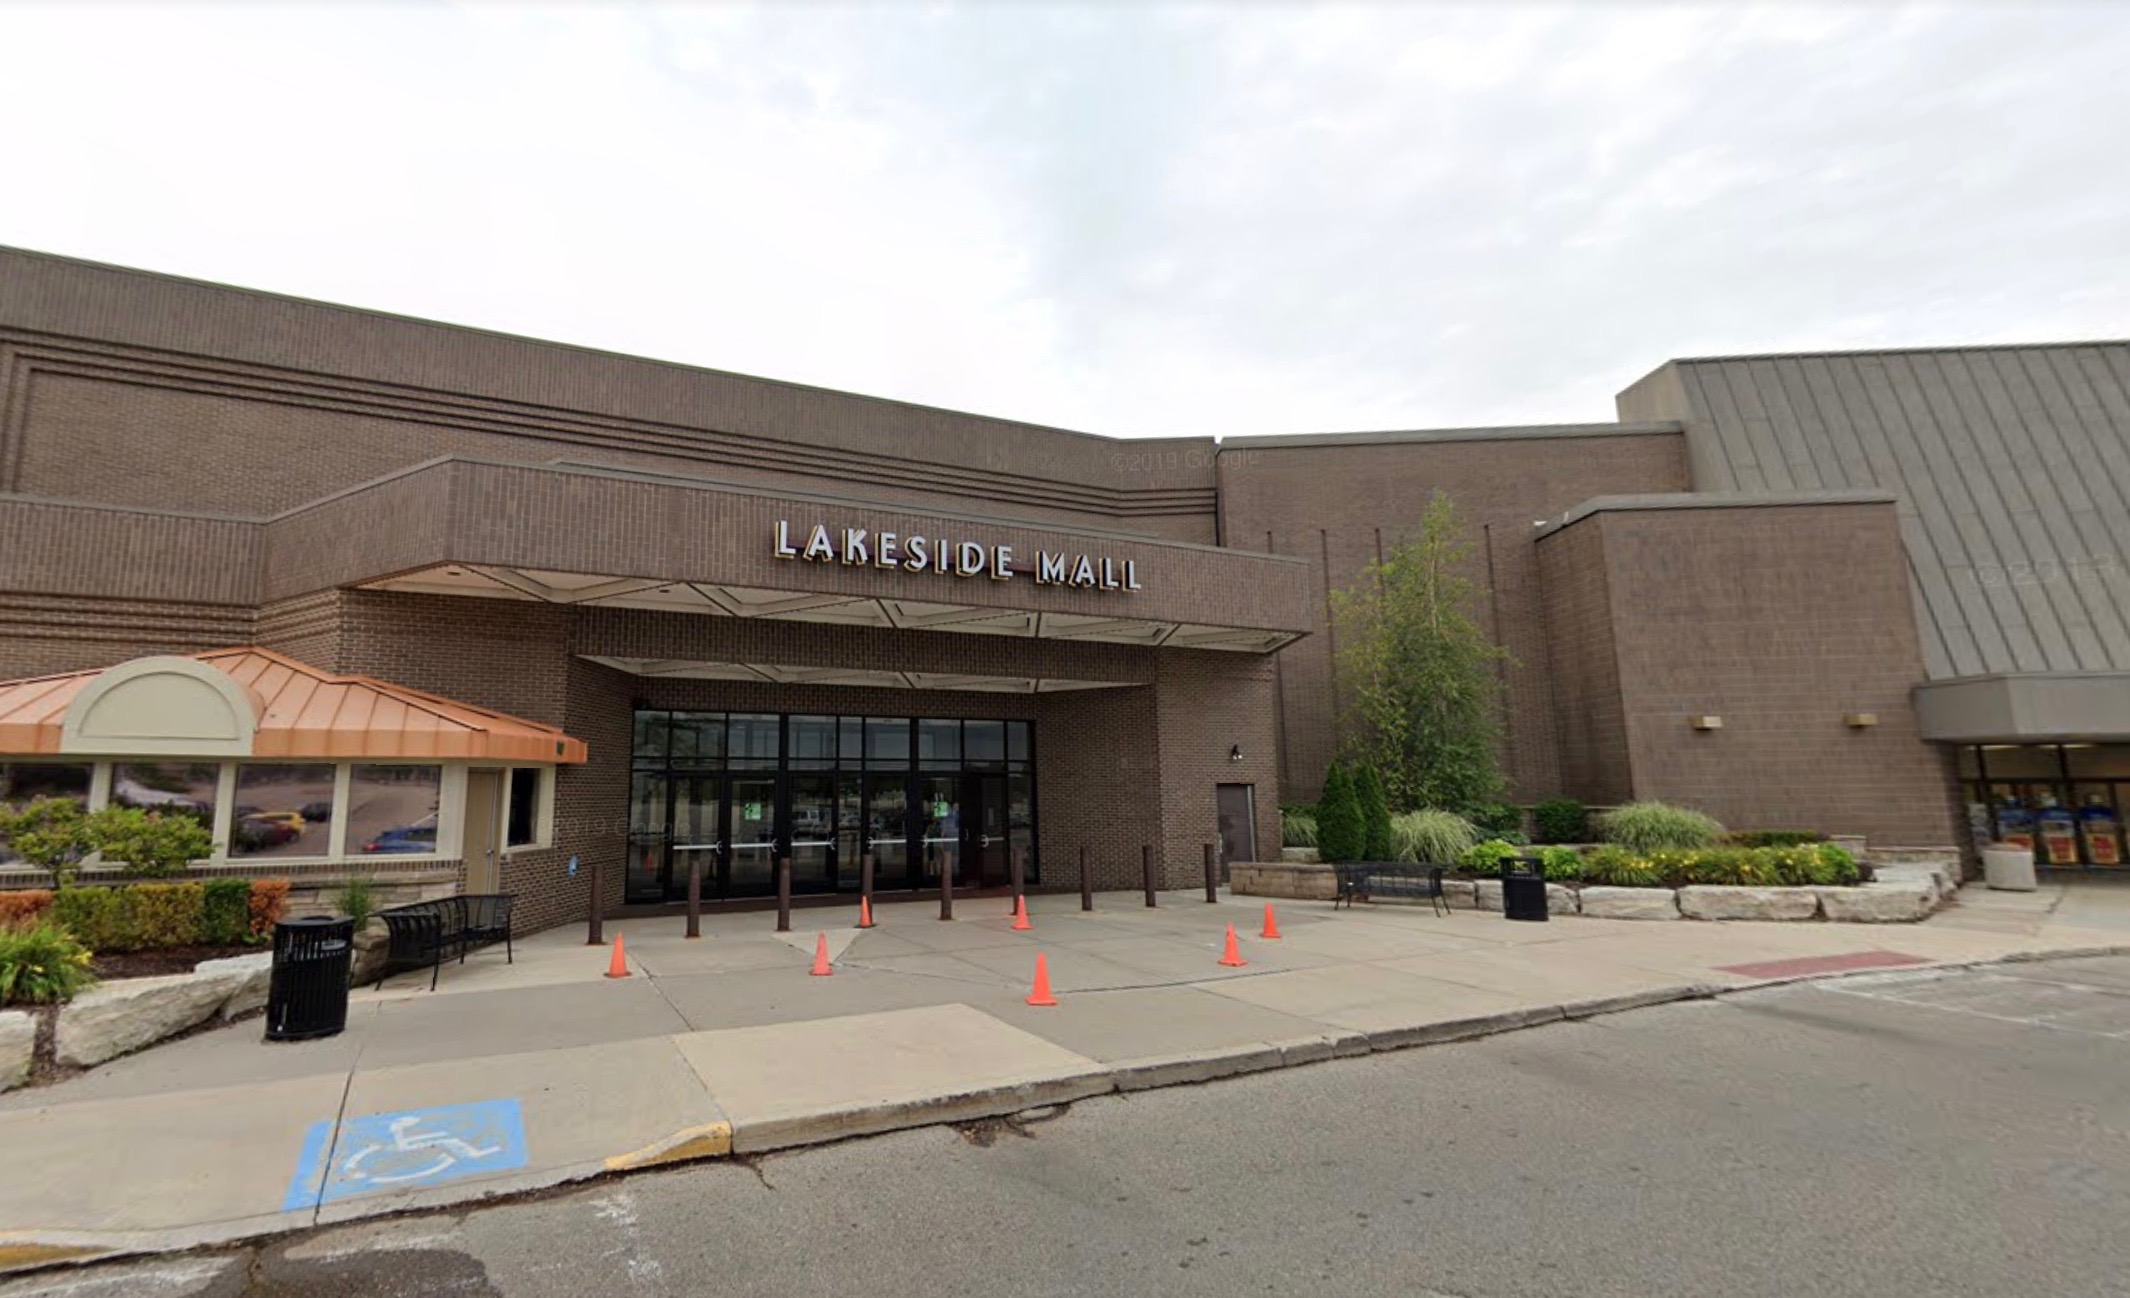 Exterior of a low brick building. “Lakeside Mall” is written outside the front in block letters.